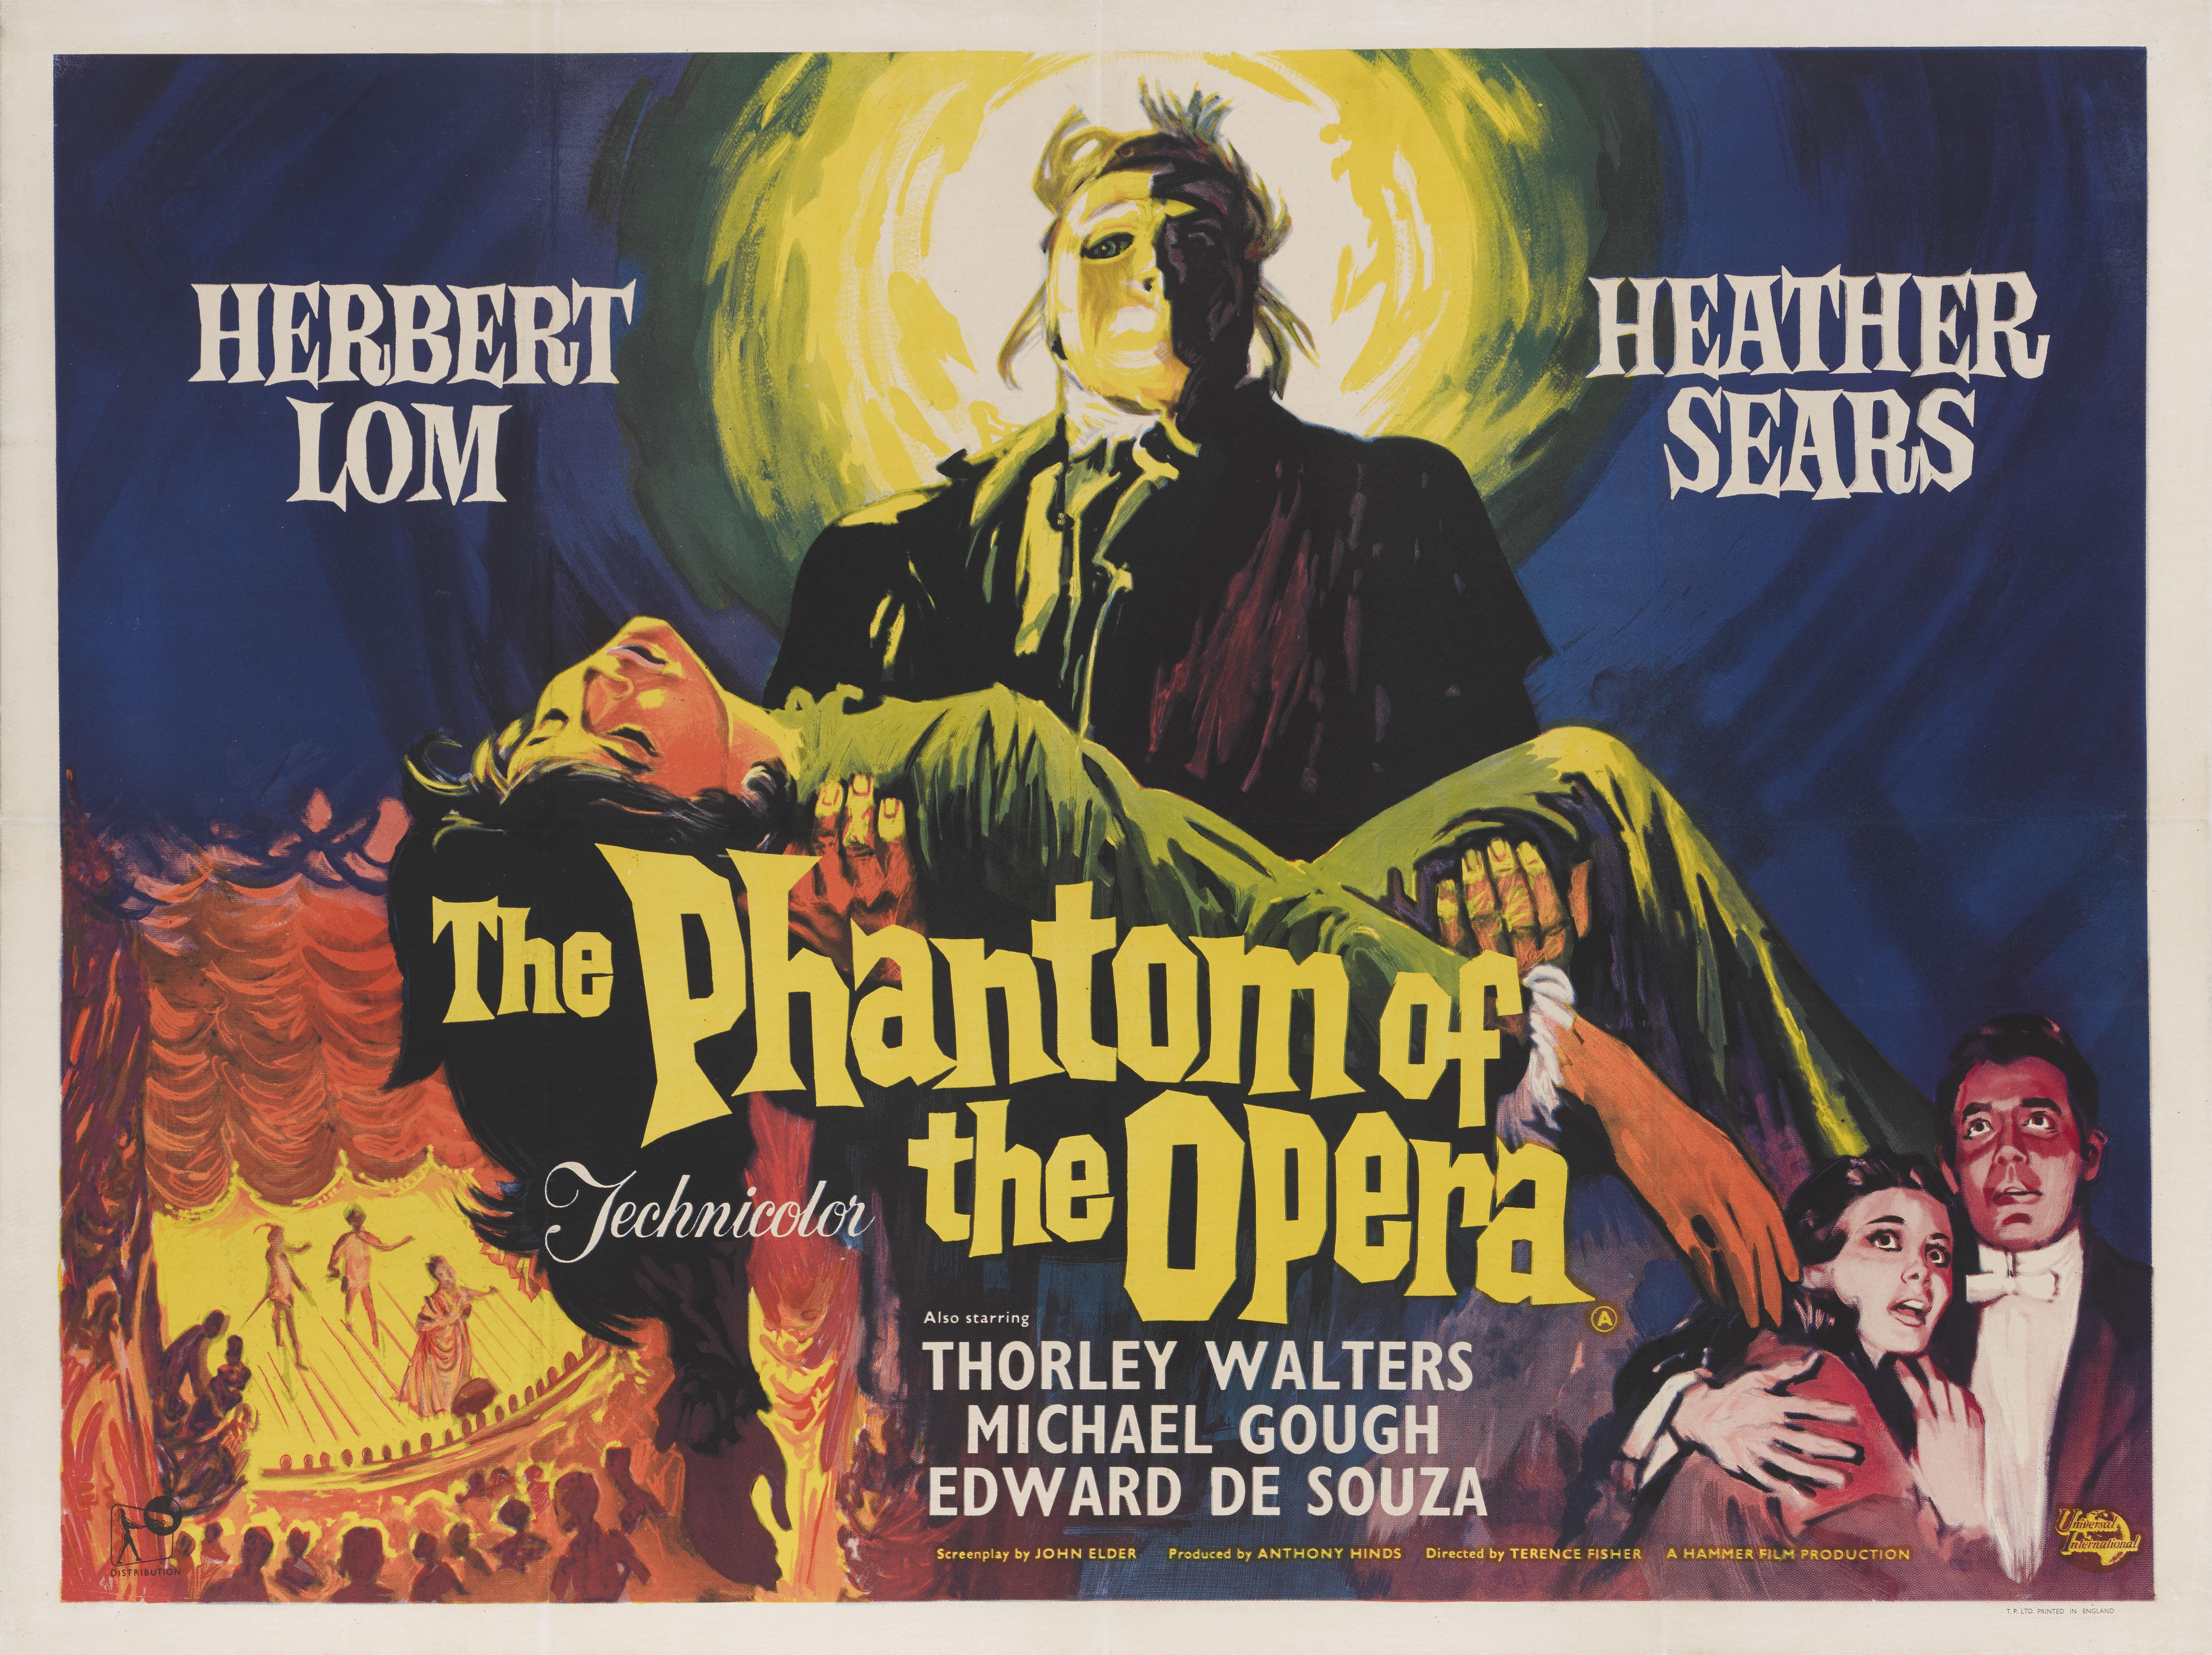 Original British fHammer Horror film poster for the 1962.
This film starred  Herbert Lom and  Heather Sears and was directed by Terence Fisher.
This poster is conservation linen backed and would be shipped rolled in a strong tube and shipped by